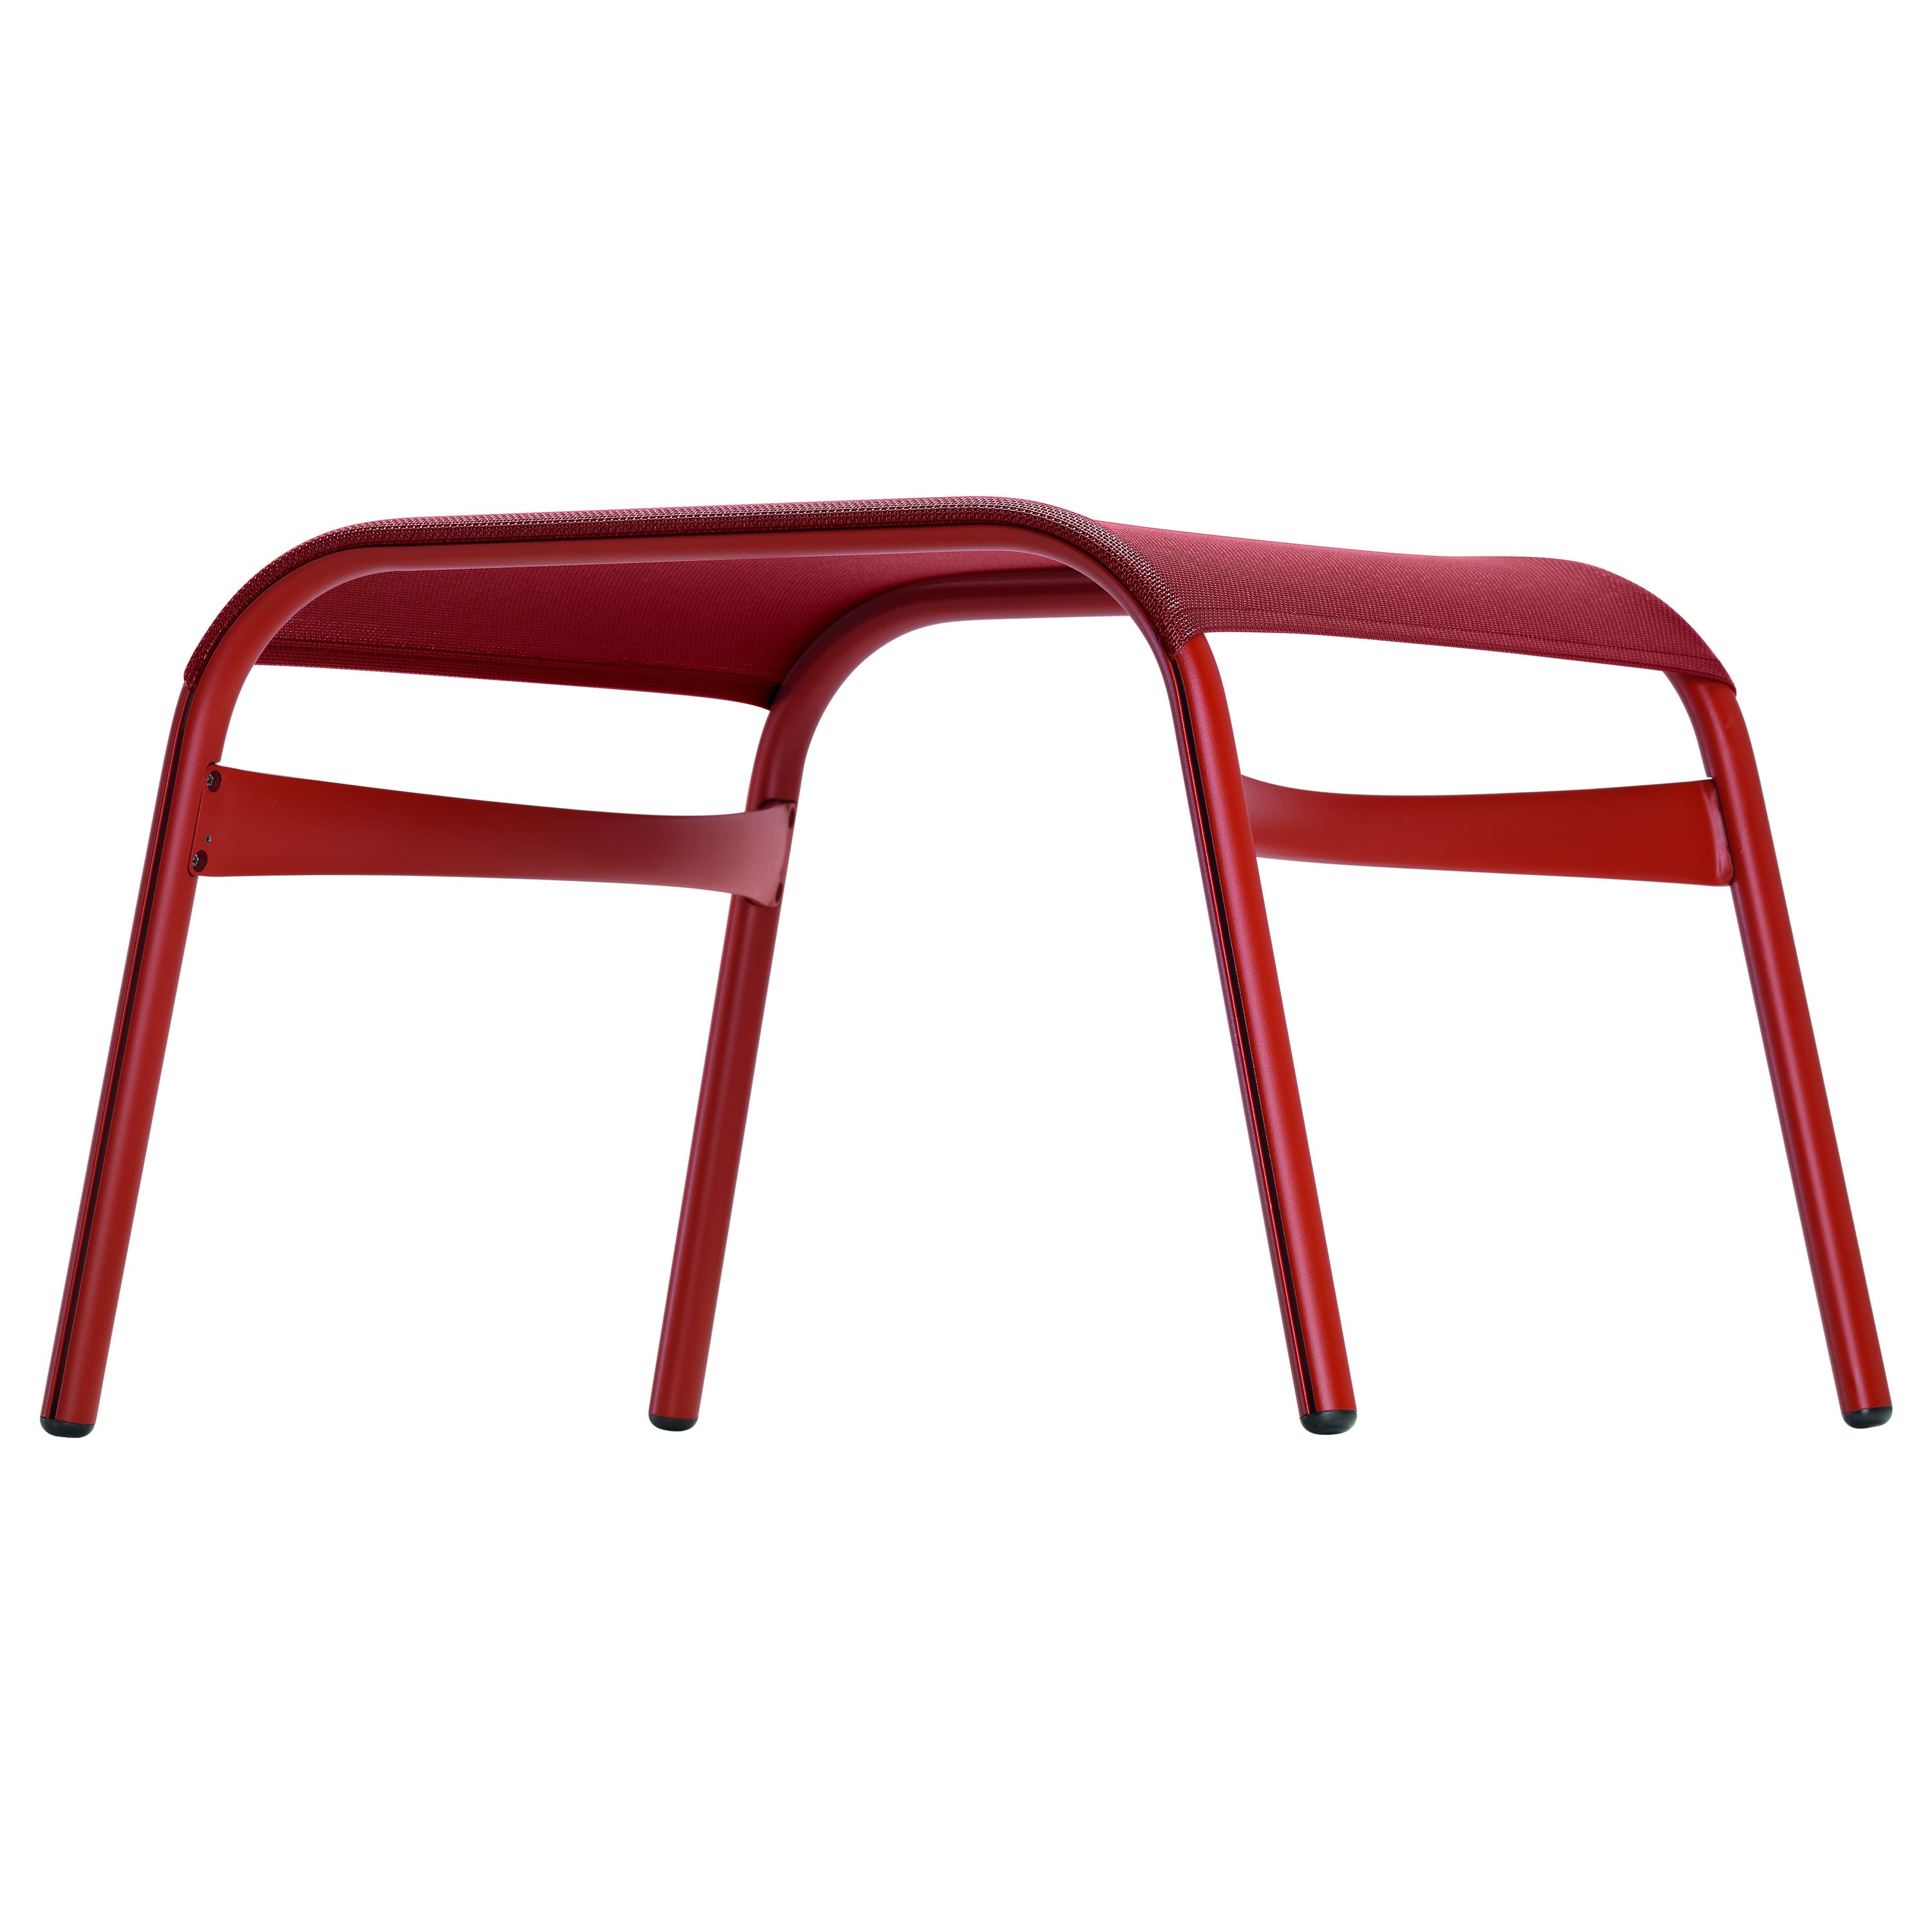 Alias Feetframe 431 Outdoor Stool in Coral Red Mesh & Lacquered Aluminium Frame